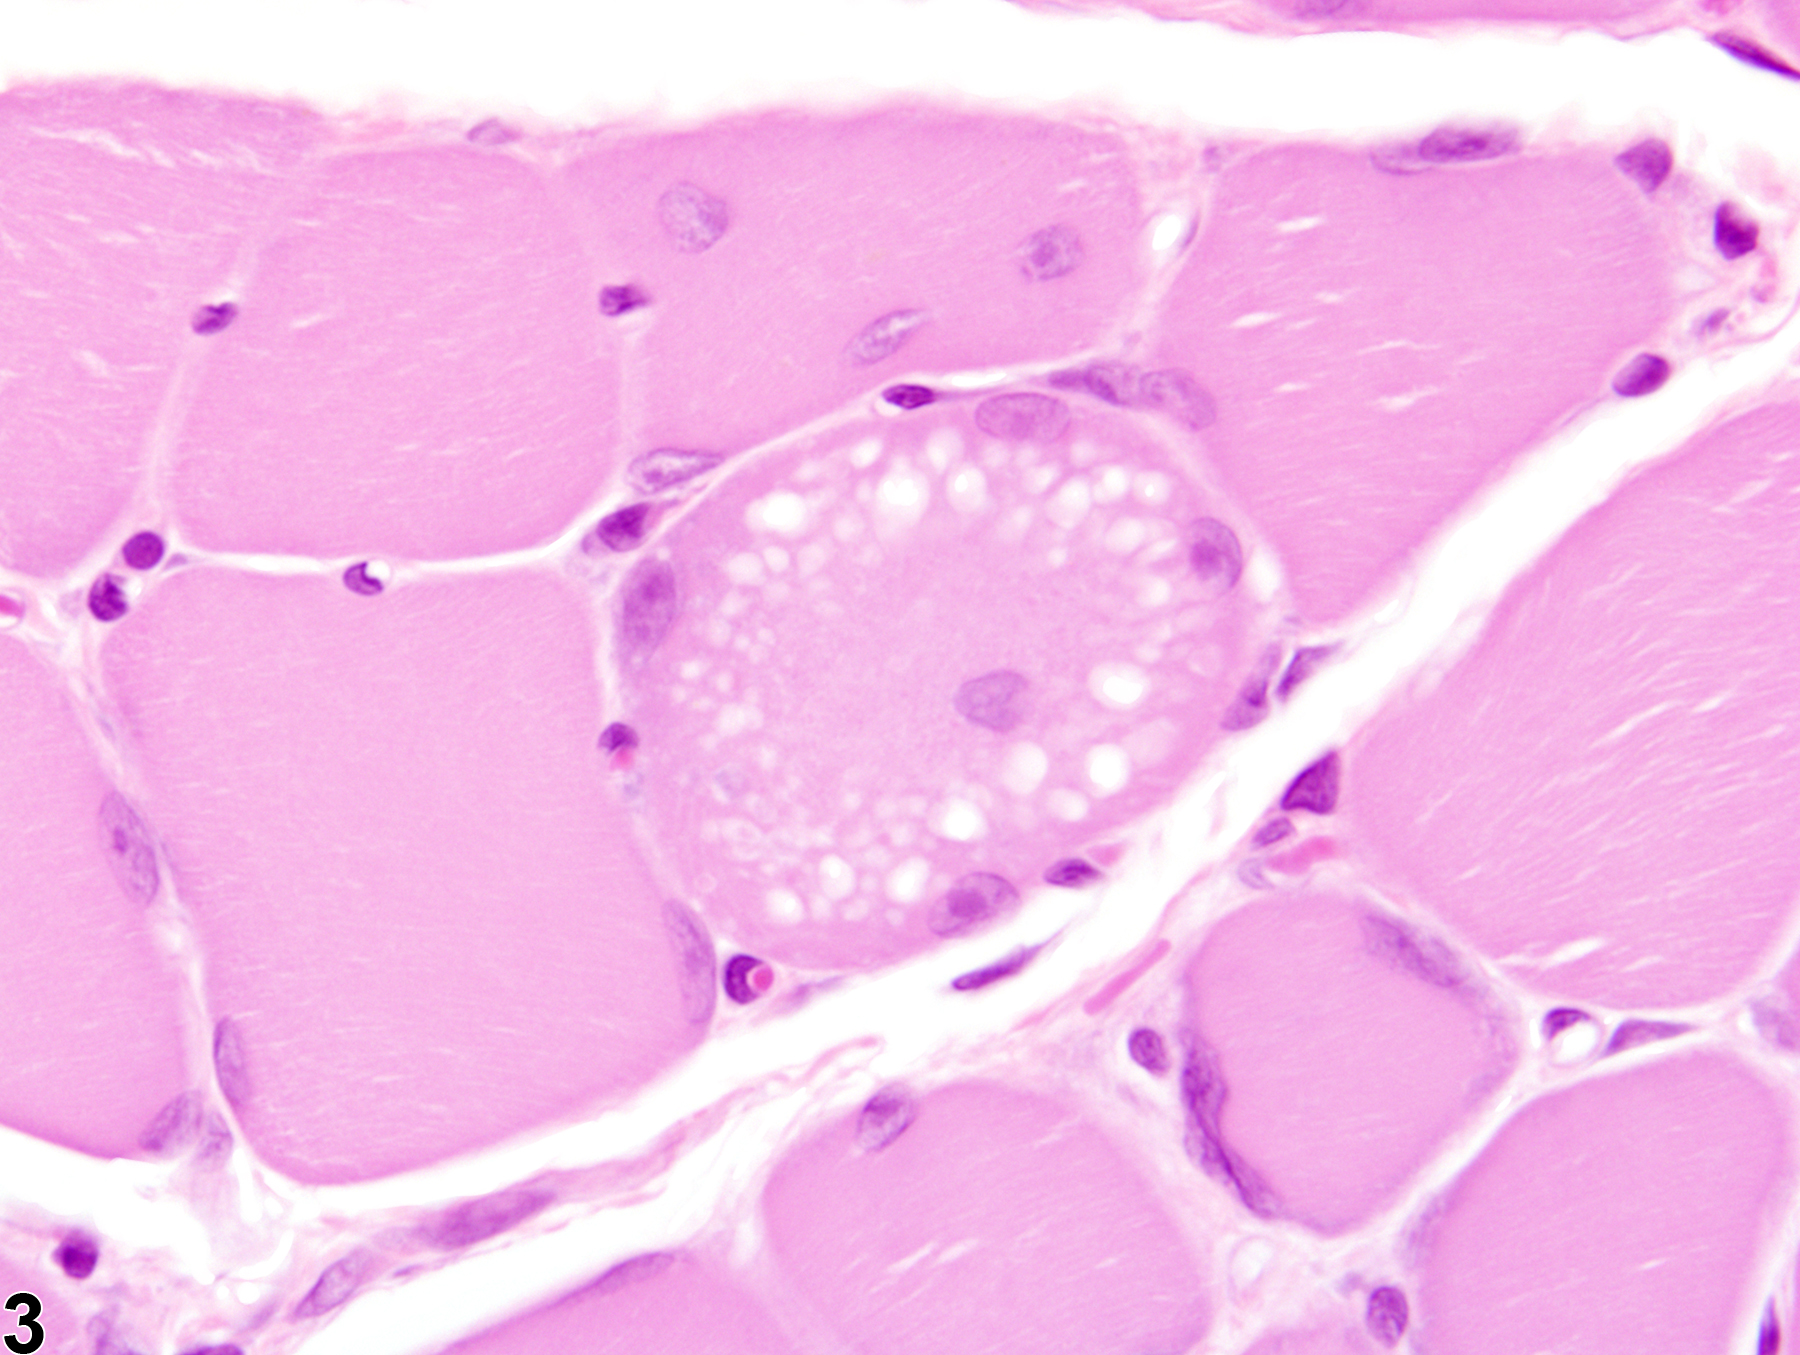 Image of degeneration in the skeletal muscle from a male Harlan Sprague-Dawley rat in a subchronic study